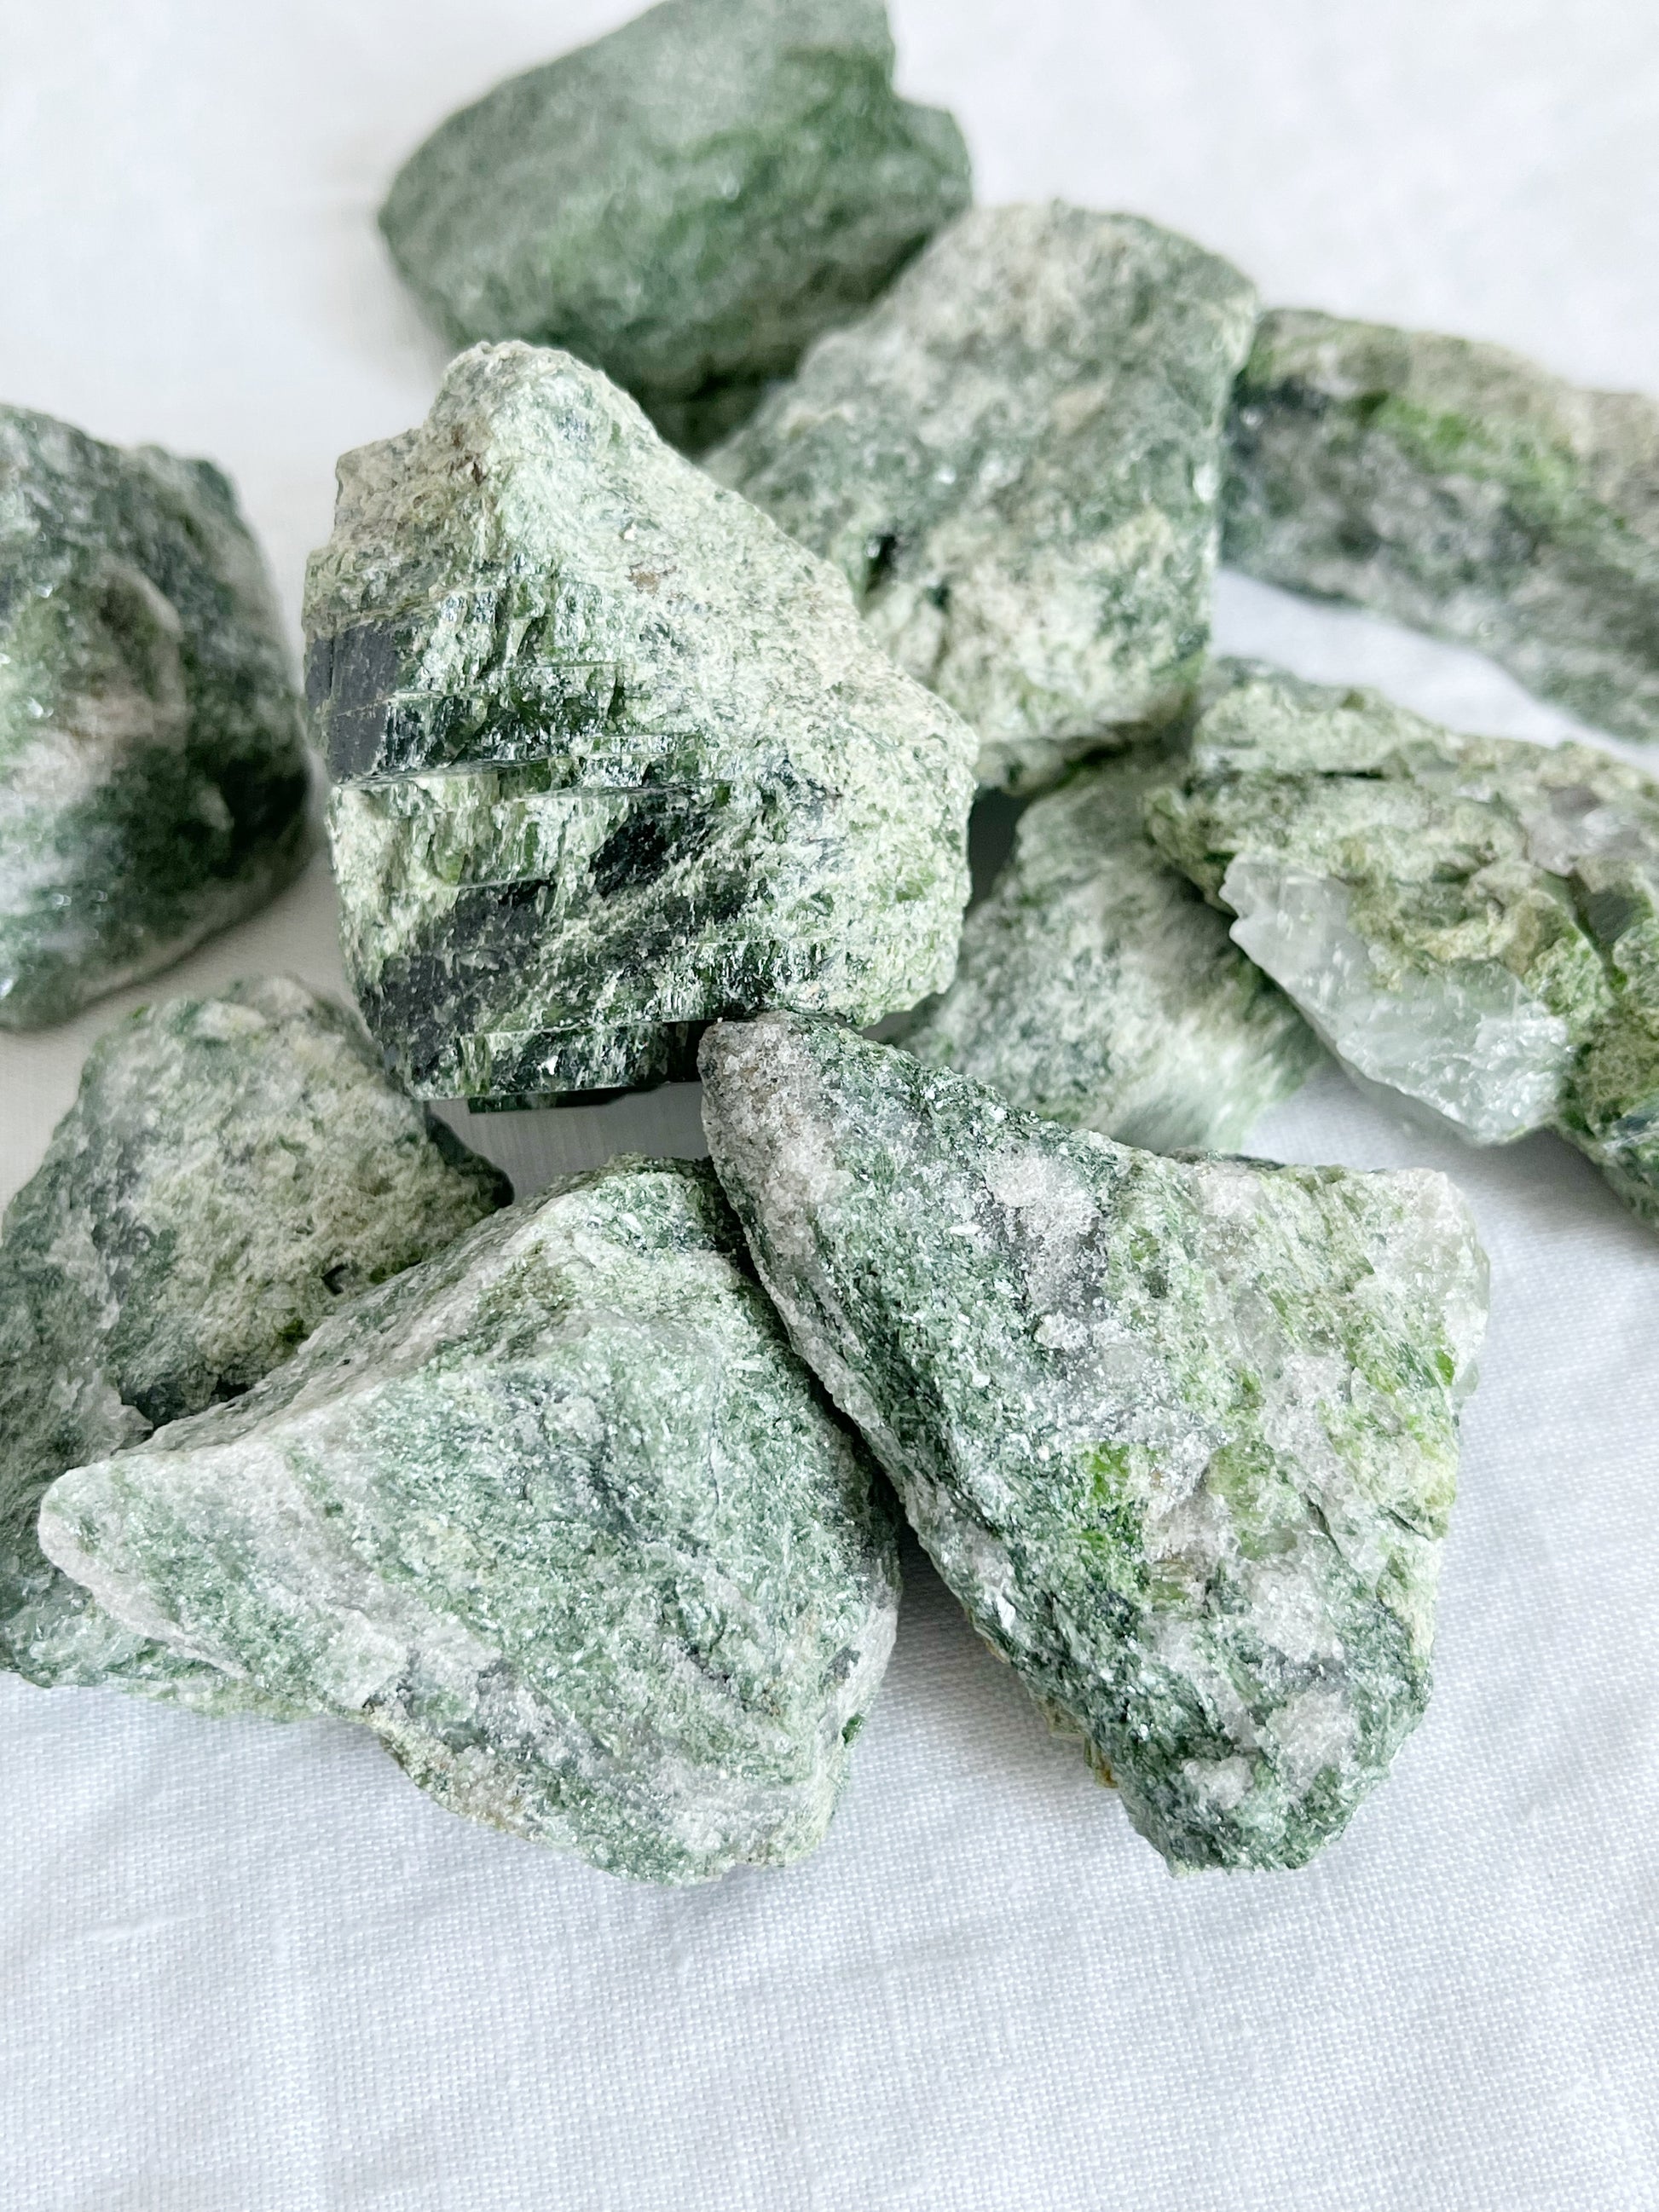 DIOPSIDE ROUGH, STONED AND SAGED AUSTRALIA